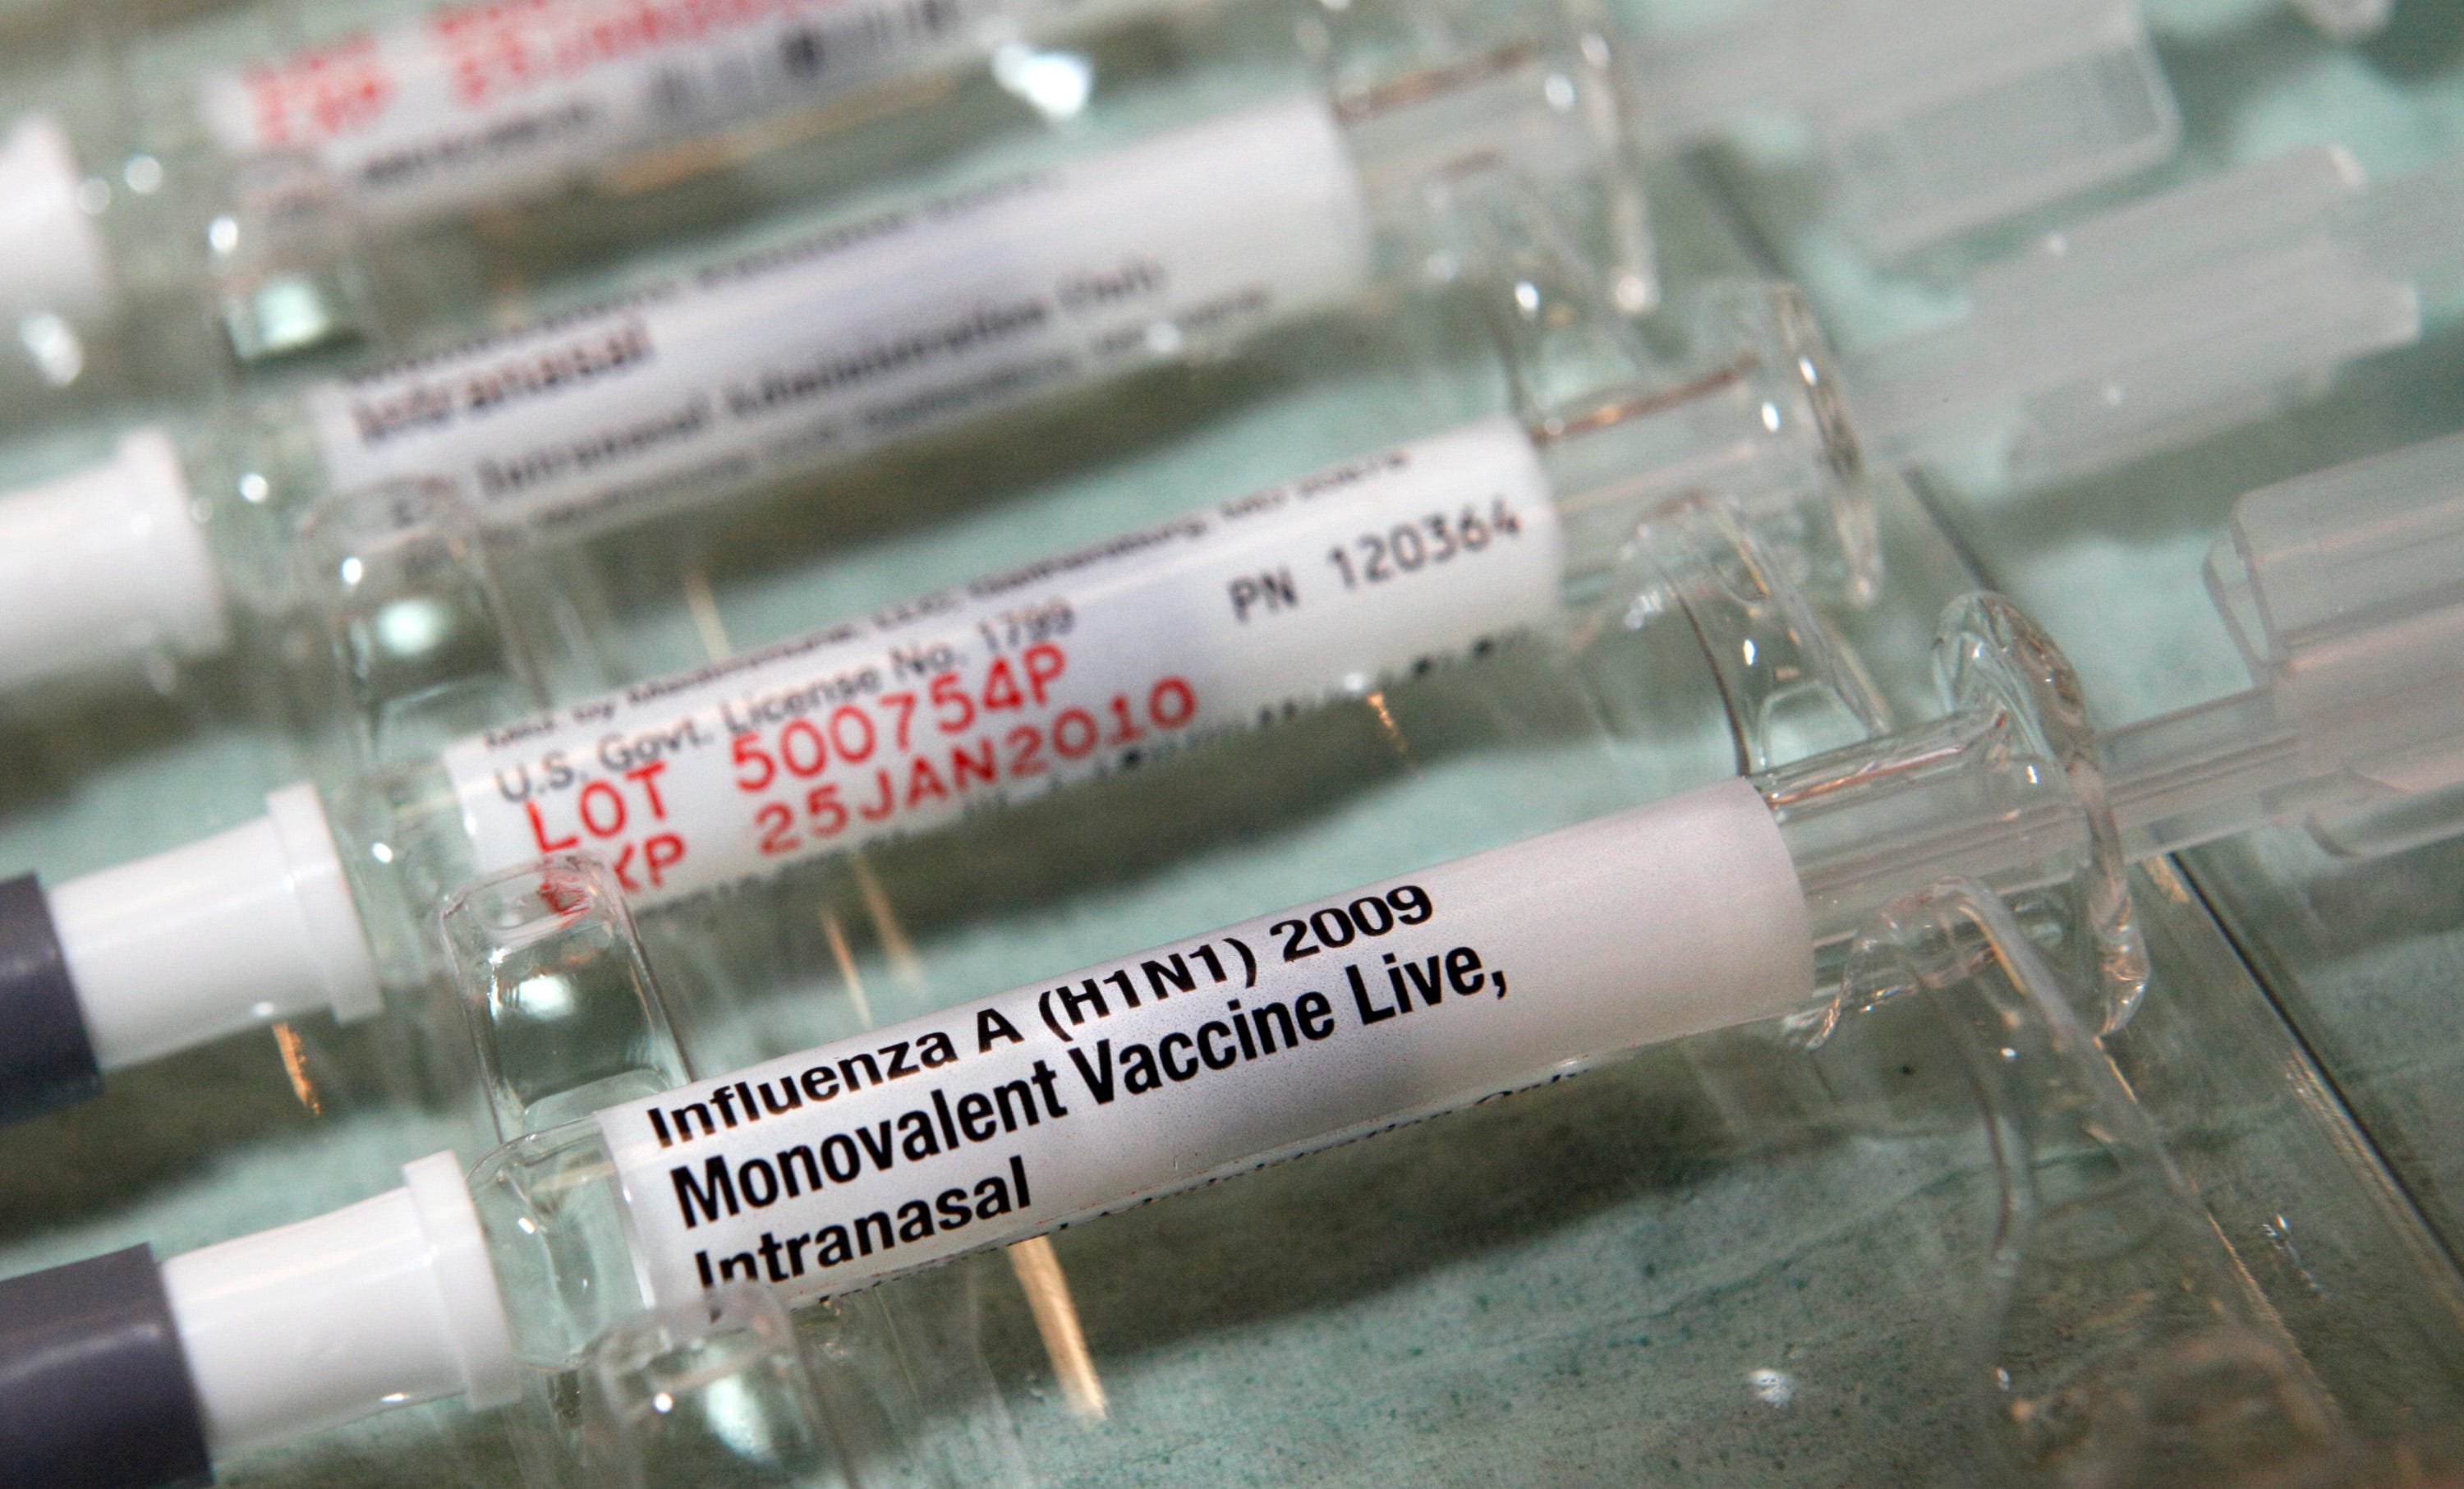 Vials of swine flu vaccine offered to residents for free in October 2009 at a West Palm Beach church. State health officials were relieved the virus did not spread as aggressively as initially feared.